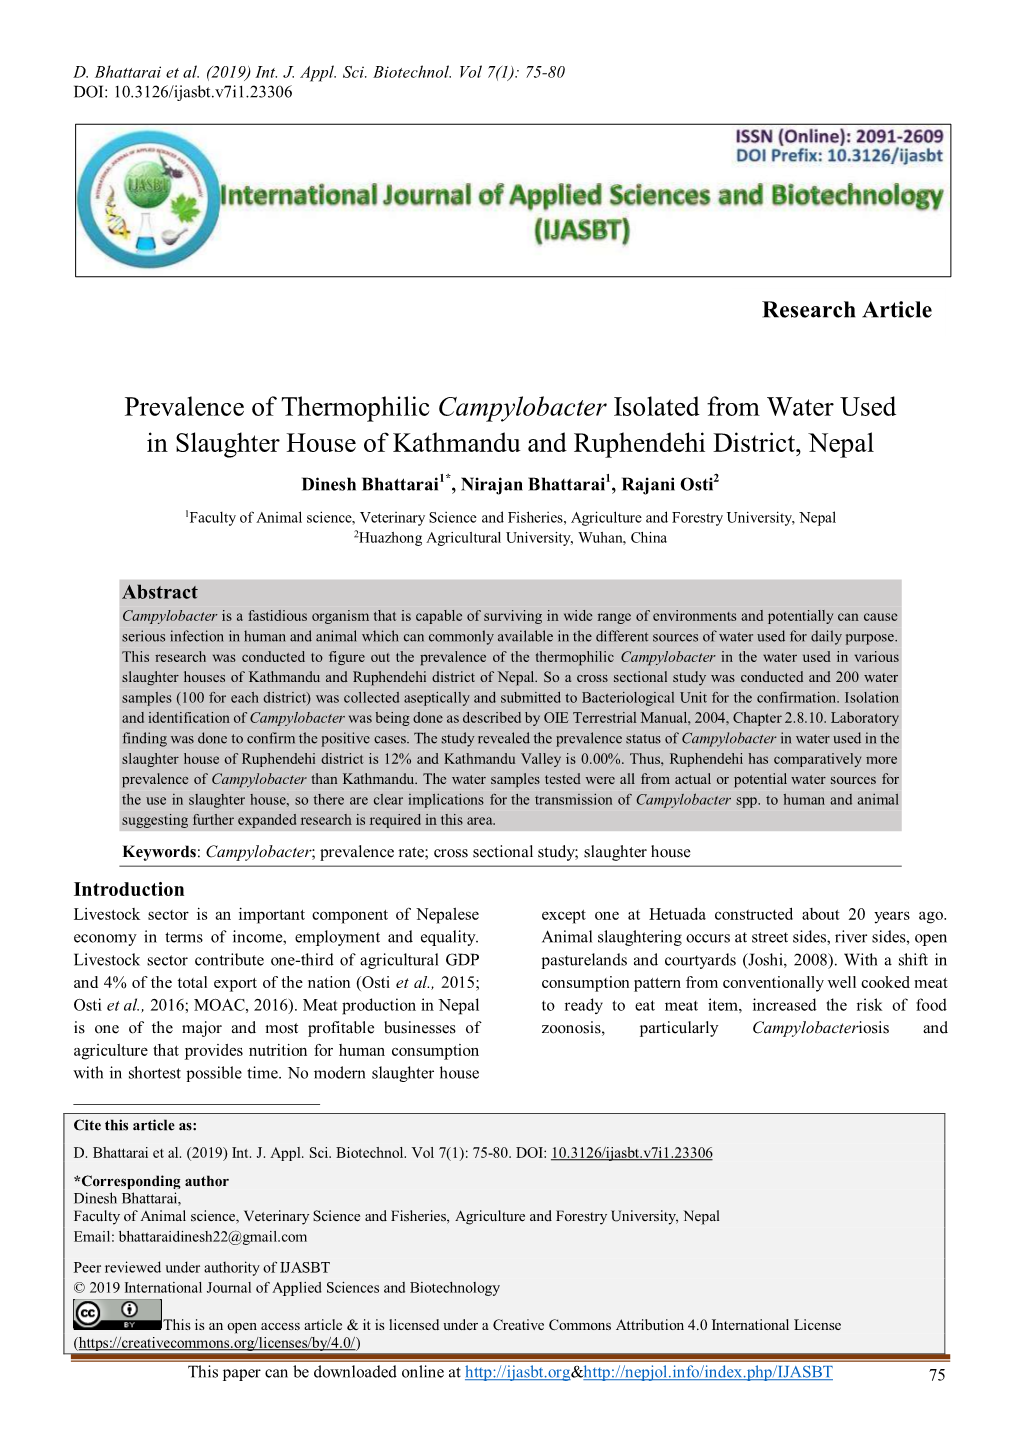 Prevalence of Thermophilic Campylobacter Isolated from Water